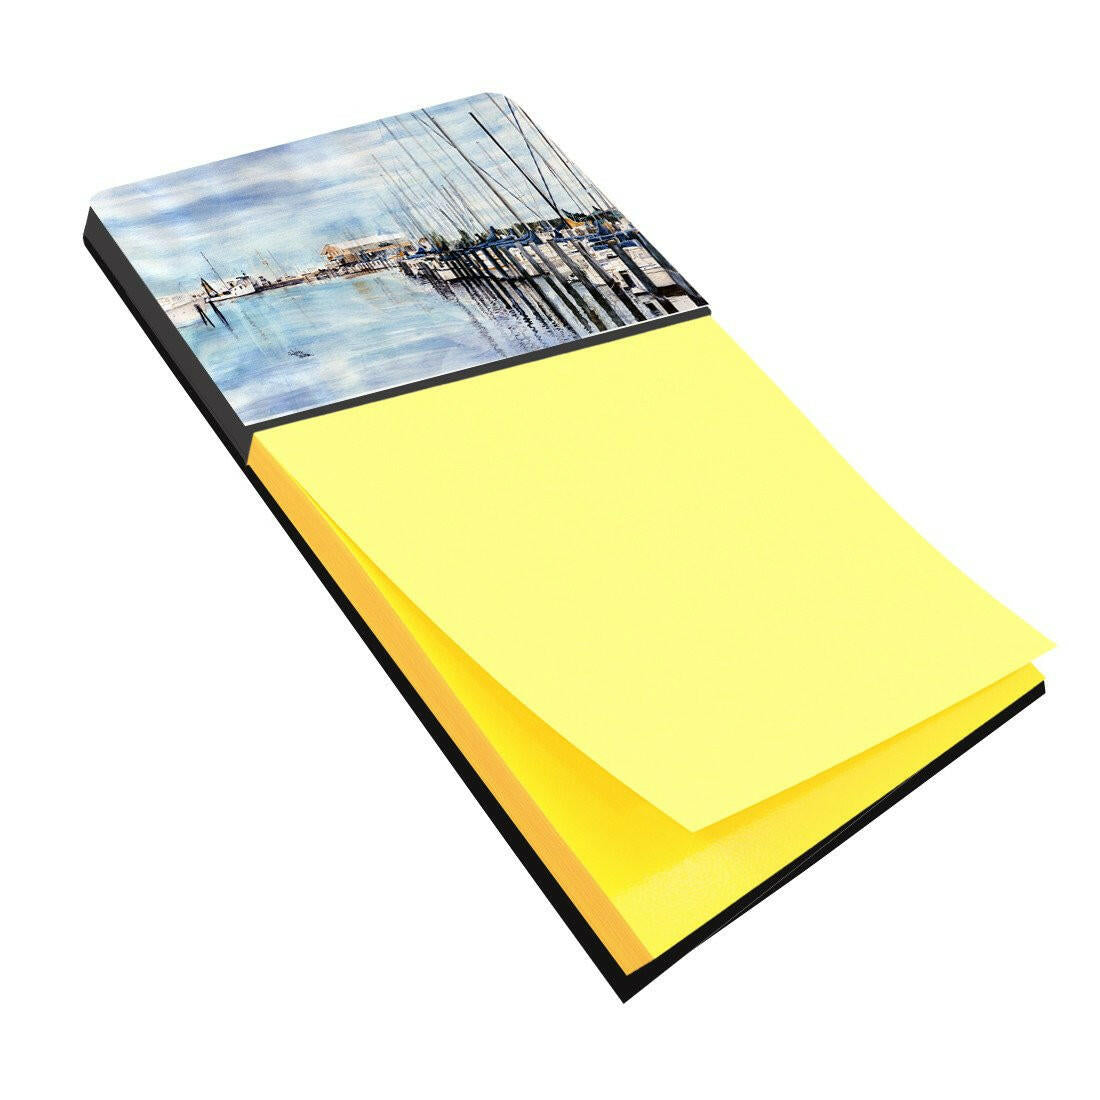 The Warf Refiillable Sticky Note Holder or Postit Note Dispenser 8128SN by Caroline's Treasures